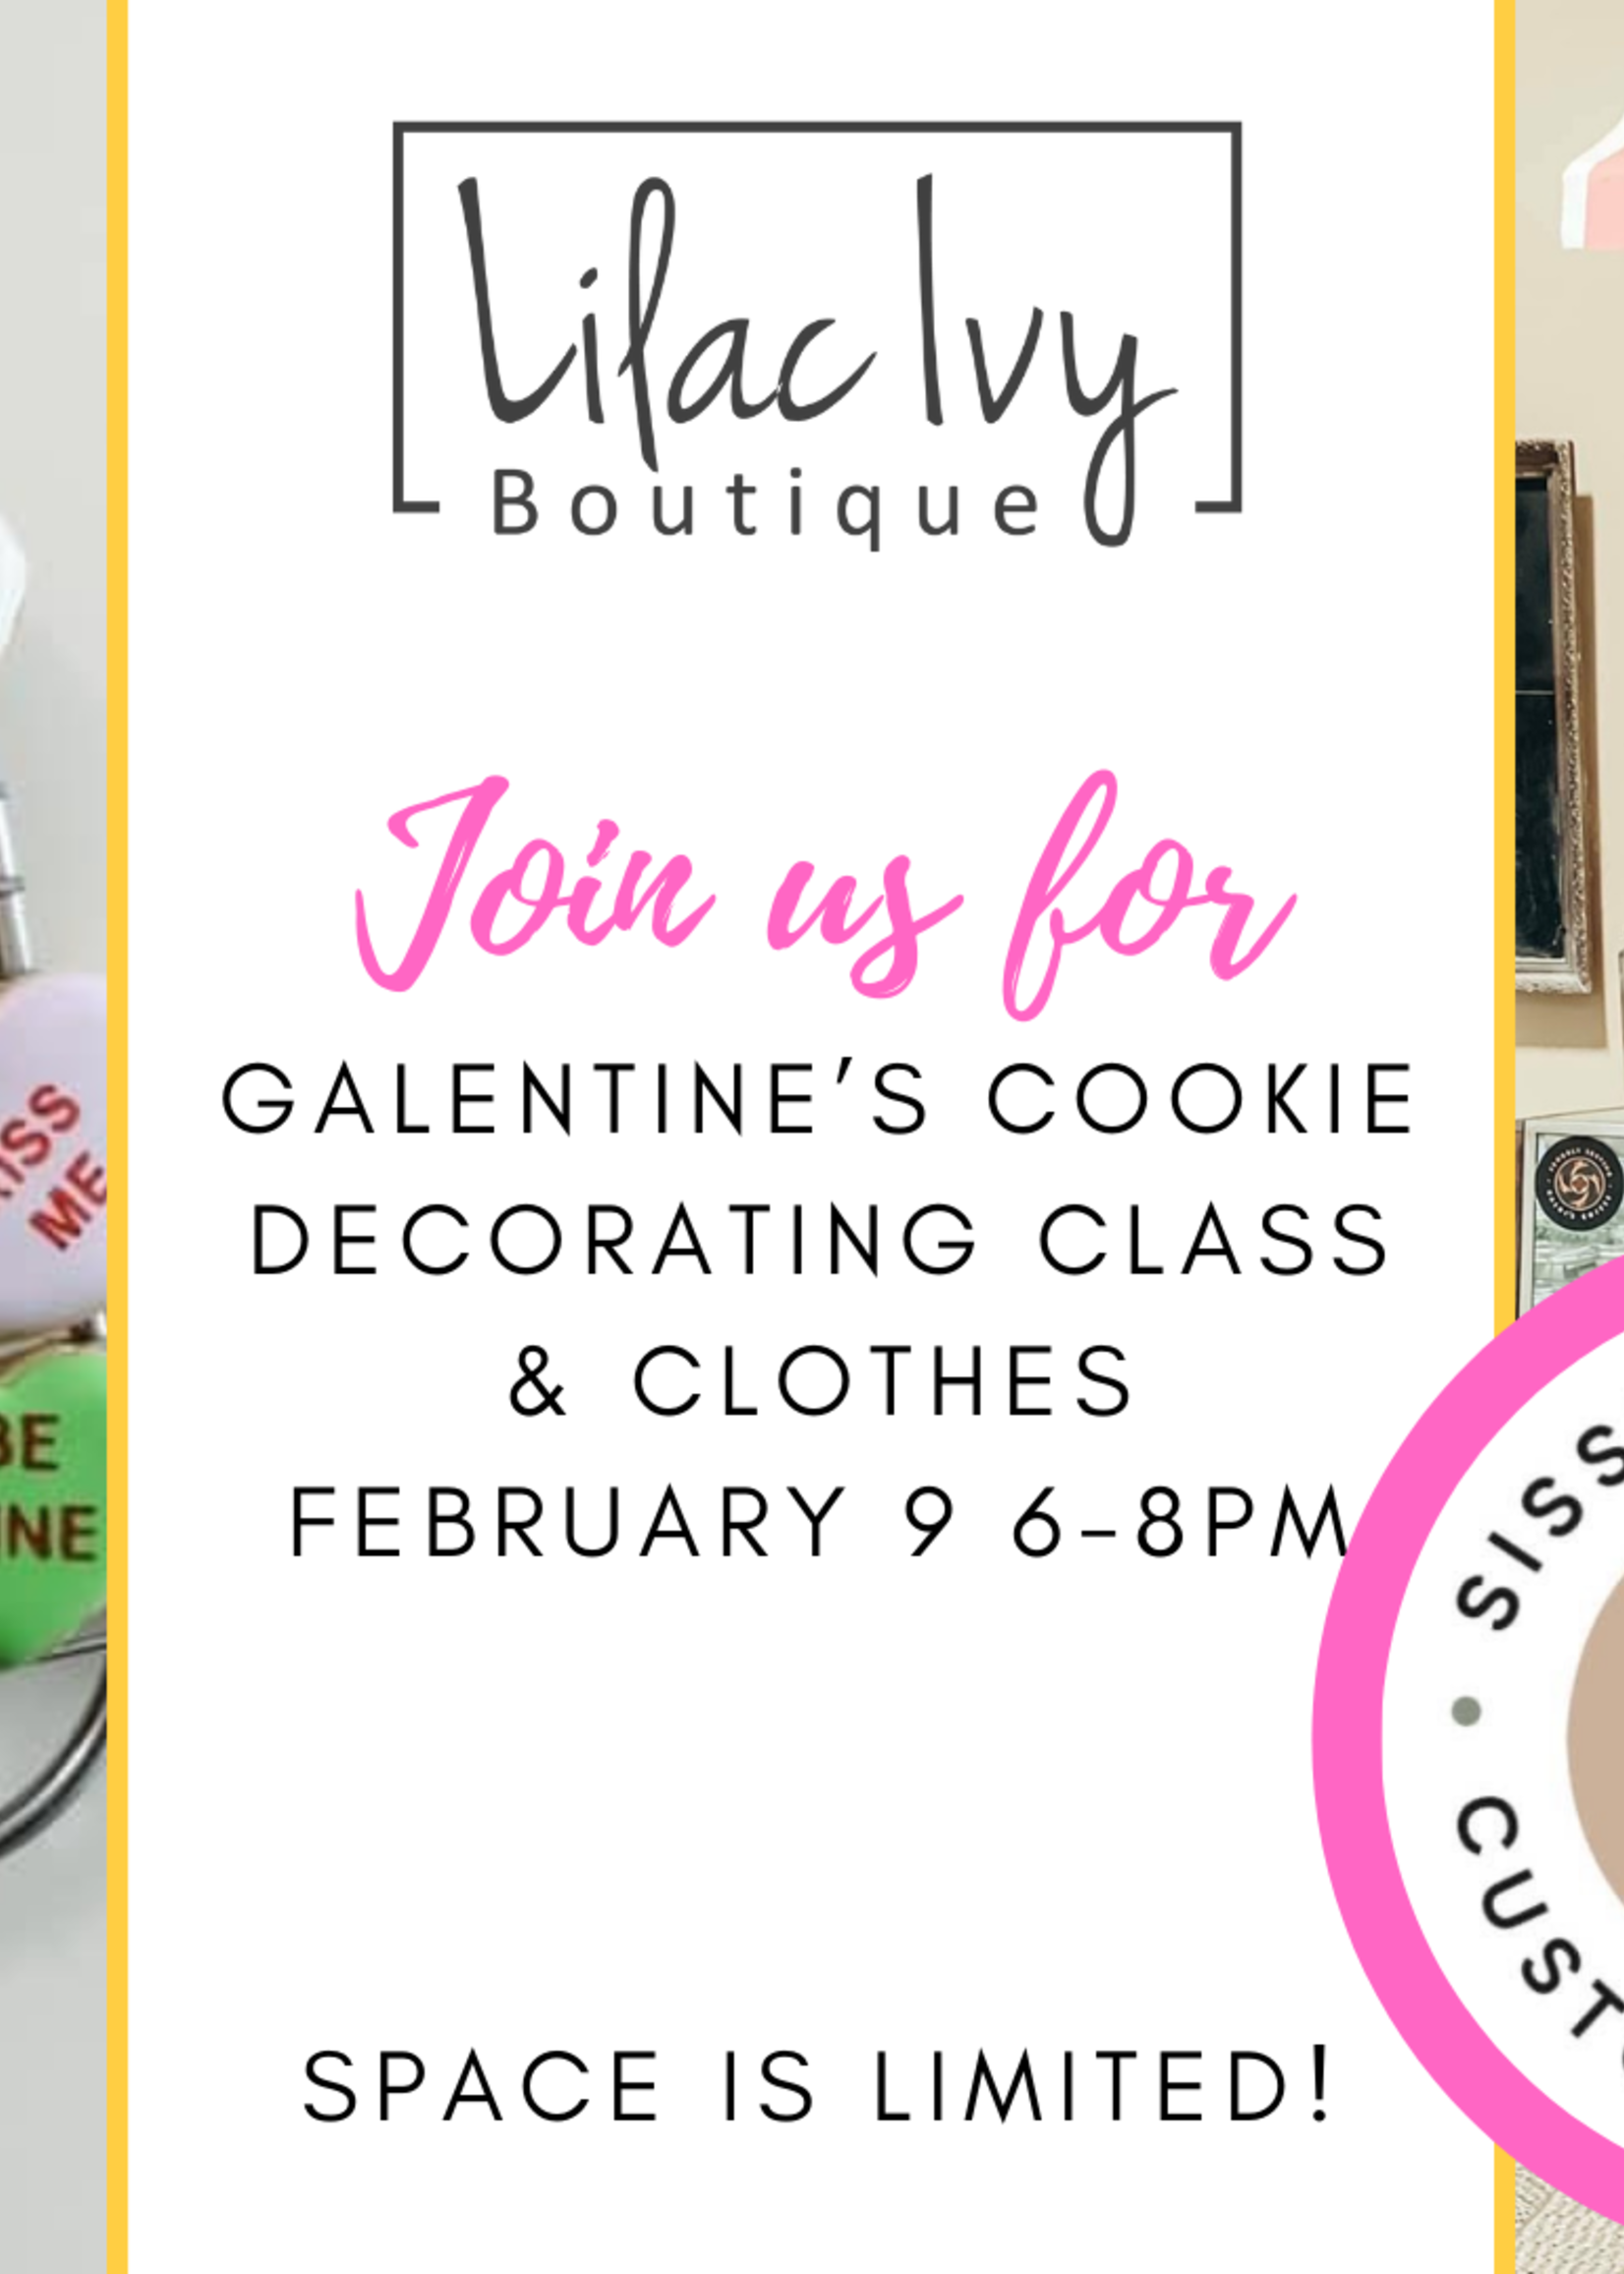 Galentine Cookie Decorating Event - February 9 6-8PM